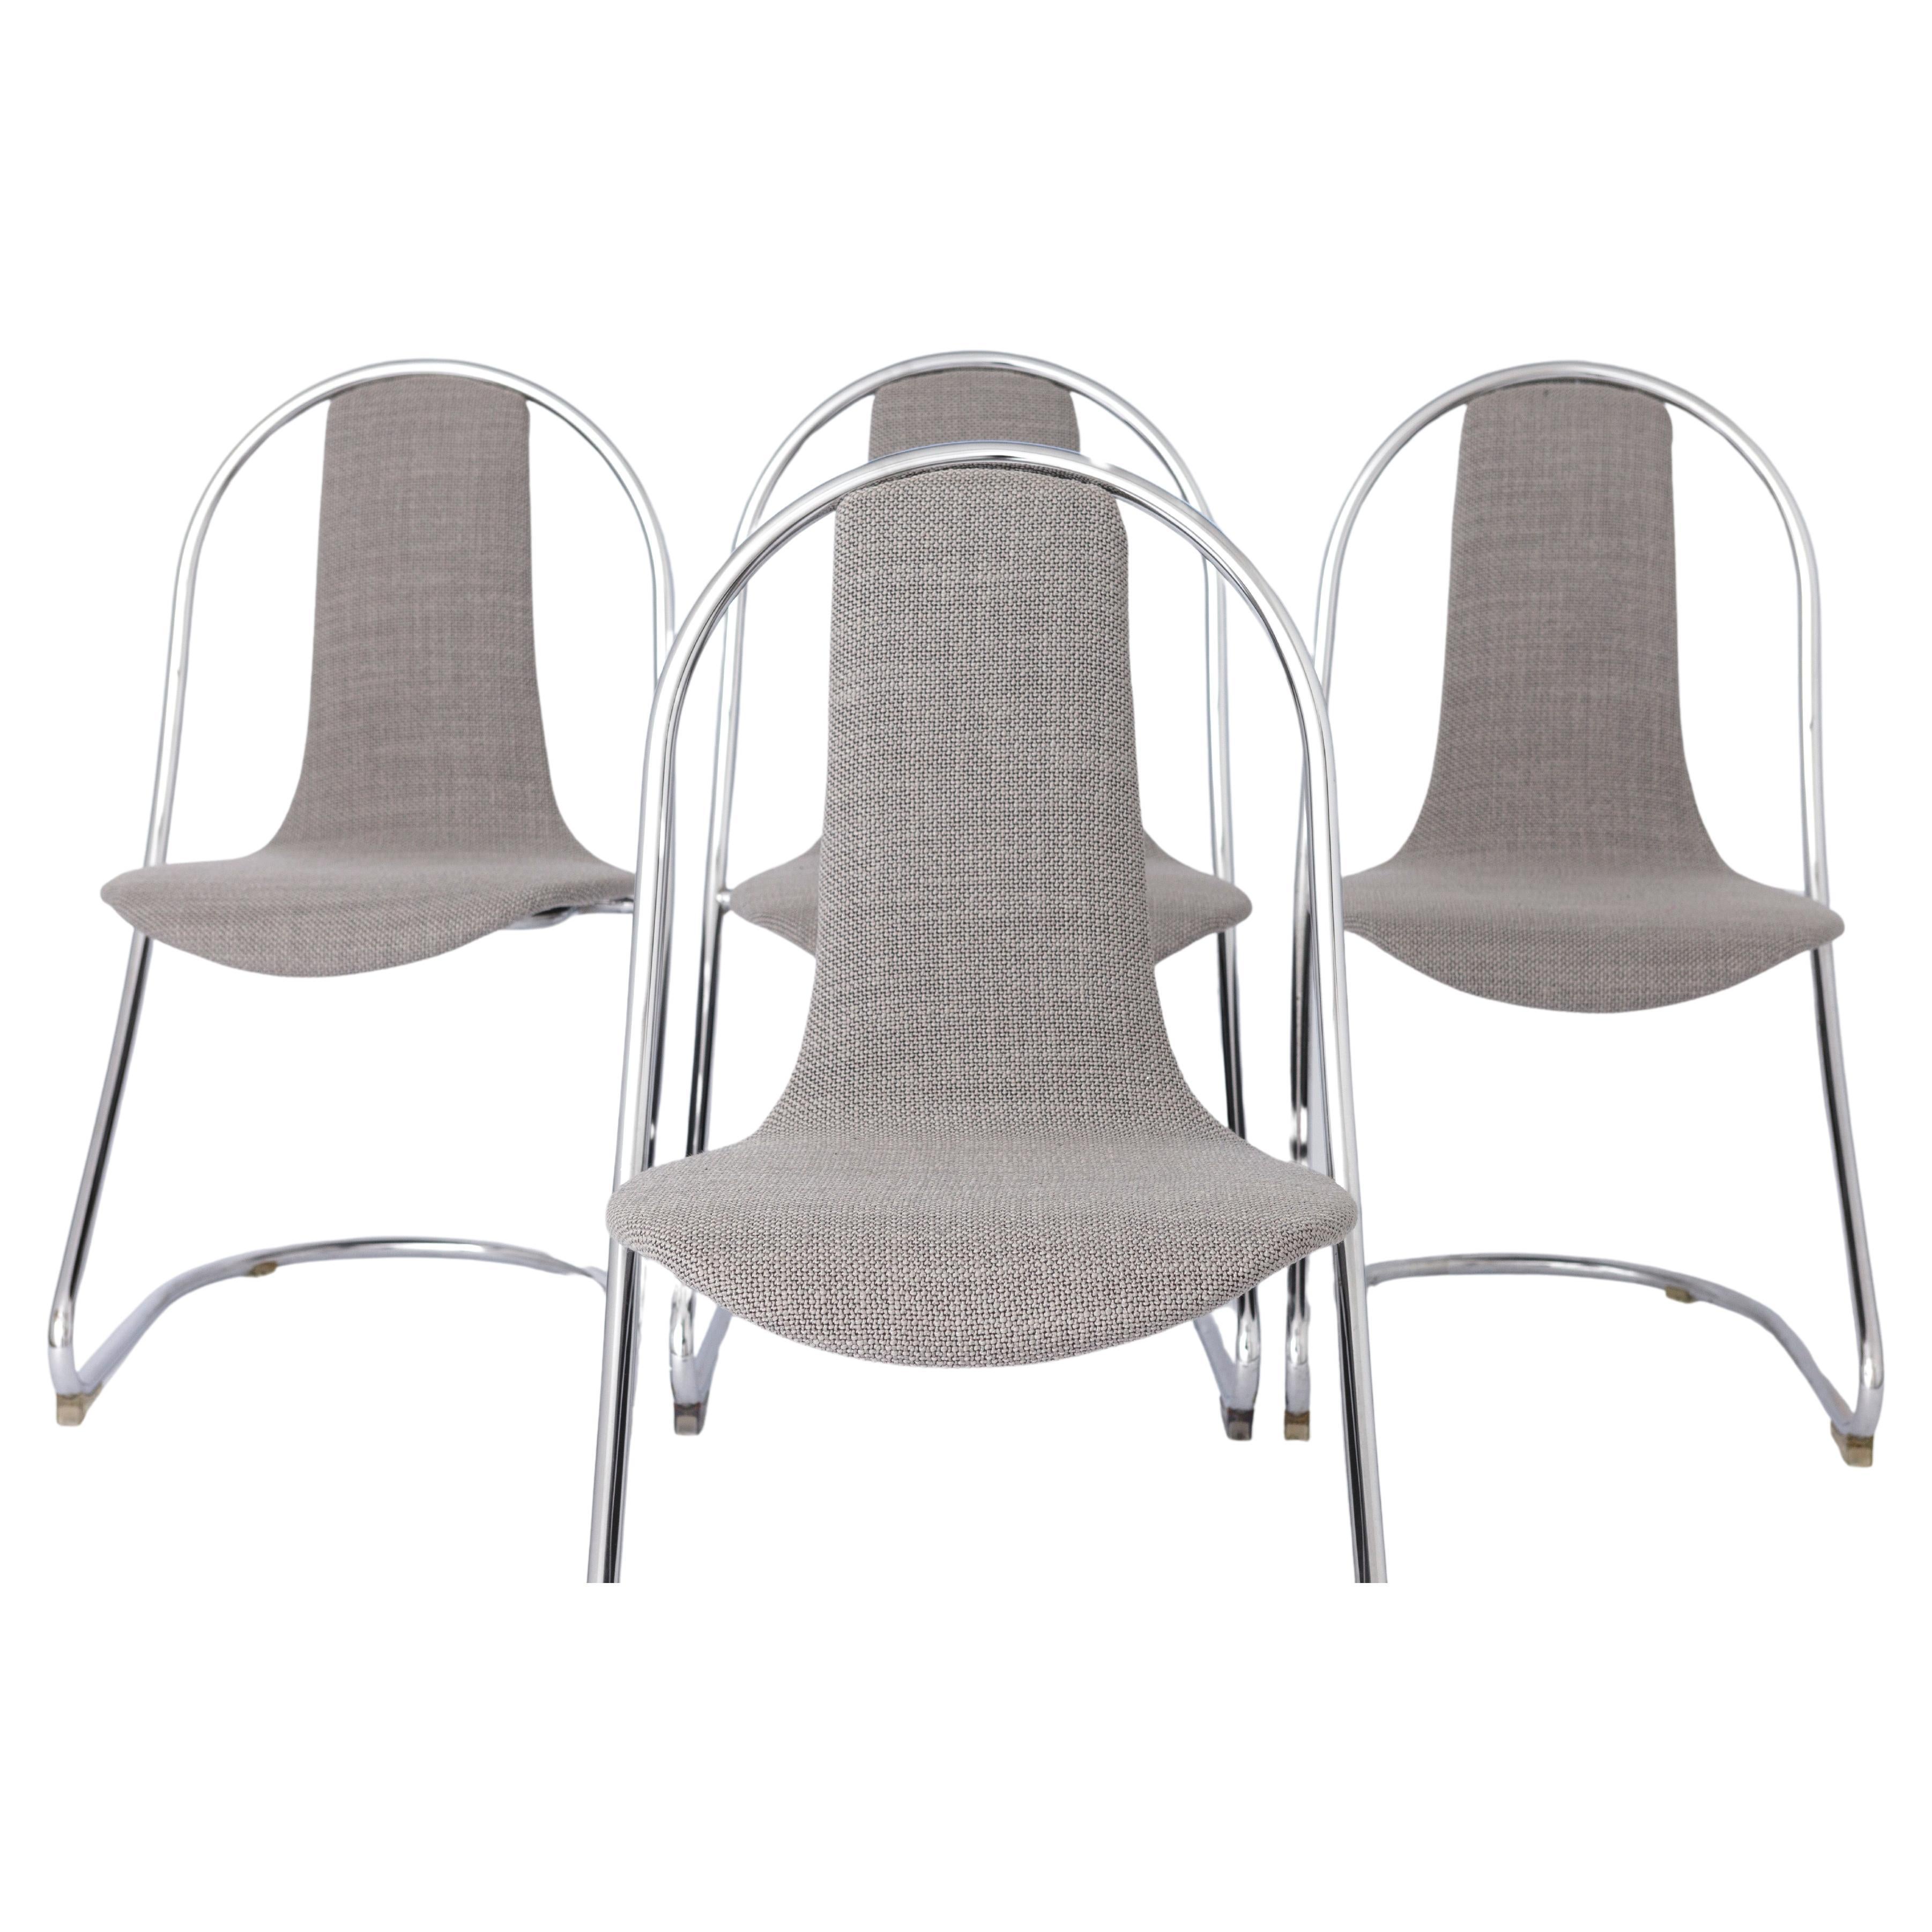 4 Space age chairs 1970s - by Tacke Sitzmöbel, Germany For Sale